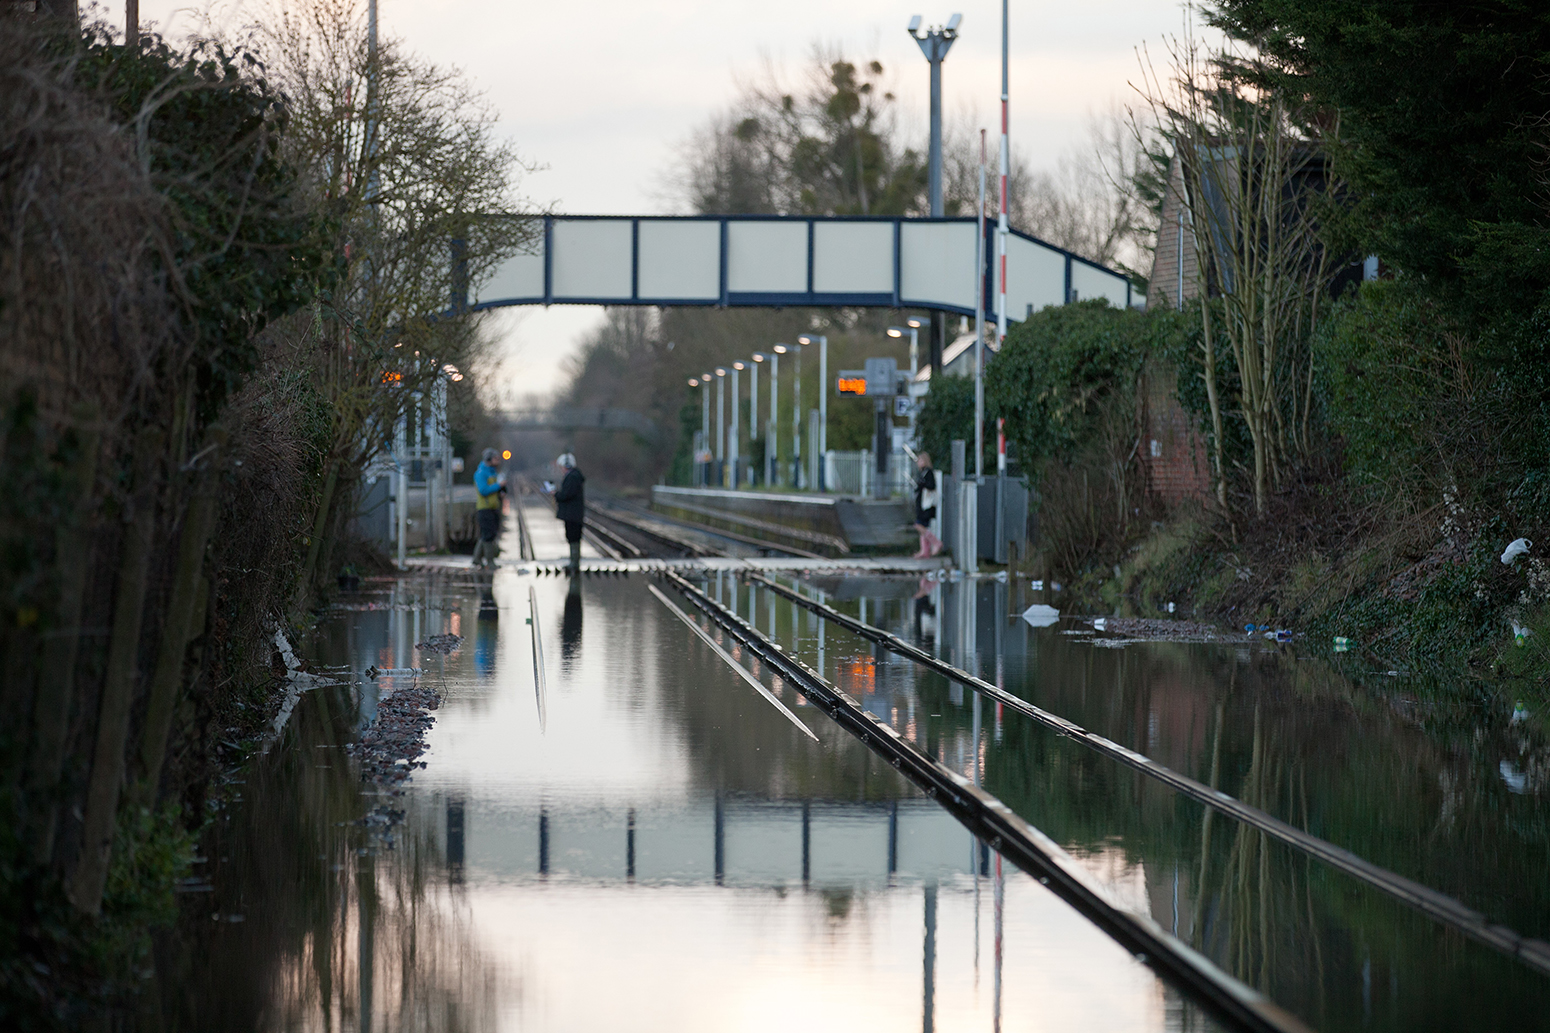 Most routes into Datchet now cut off by record Thames flood waters